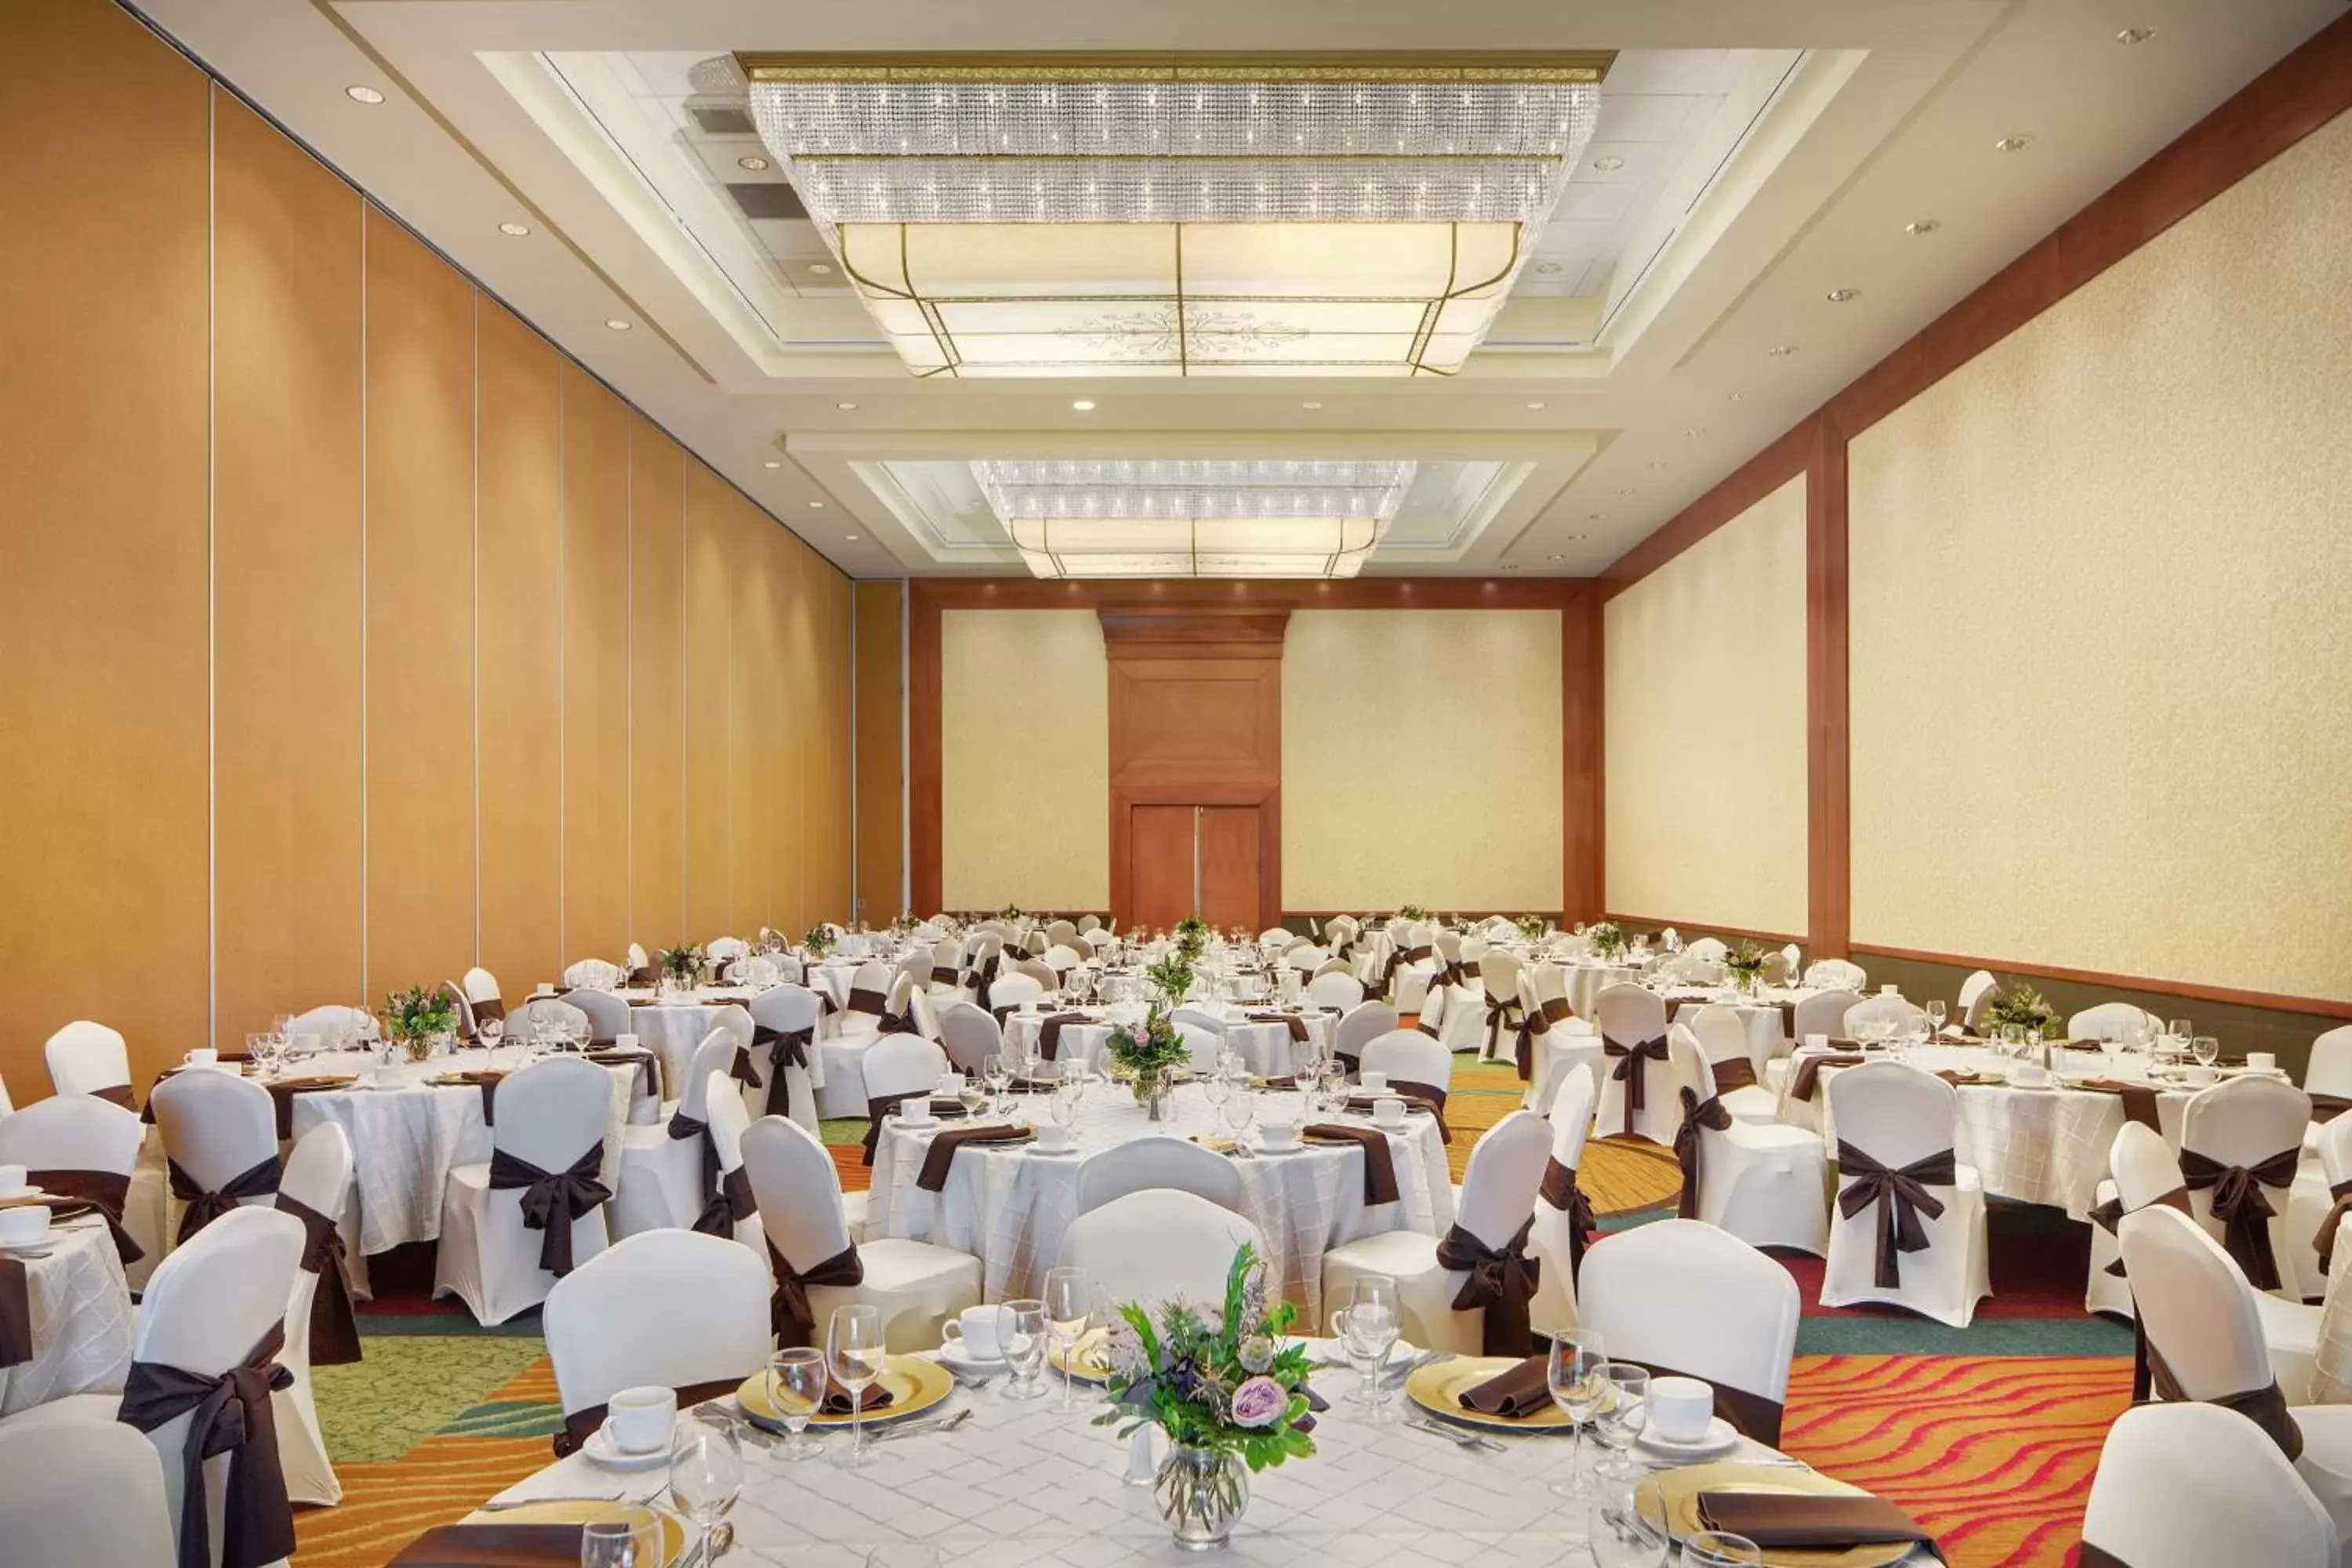 Meeting/conference room, Banquet Facilities in Hilton Seattle Airport & Conference Center